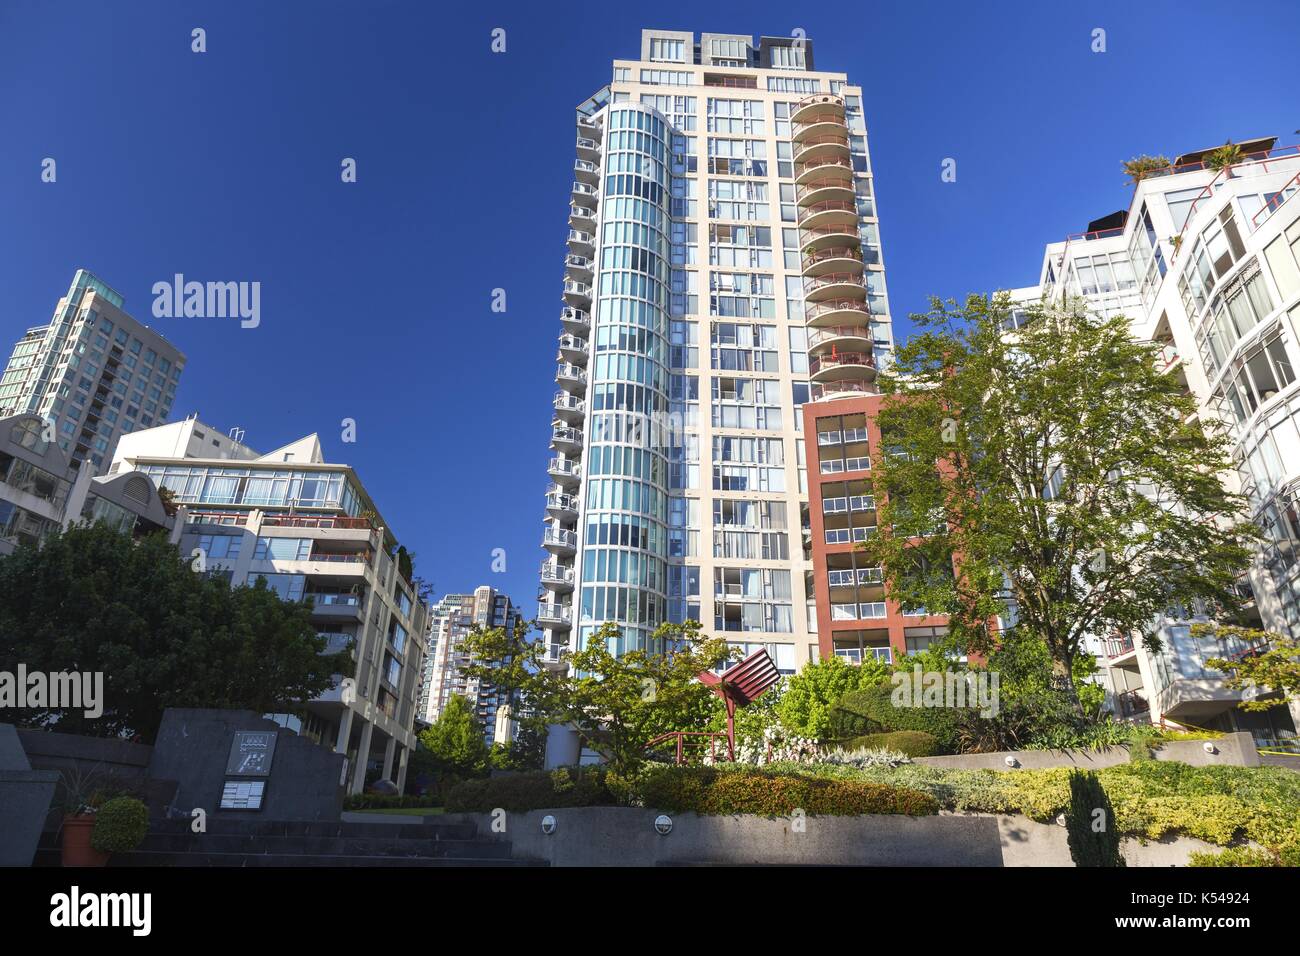 Yaletown Downtown Highrise Condo Building Houses. Vancouver City Center Blue Skyline. Expensive Real Estate British Columbia Canada Stock Photo